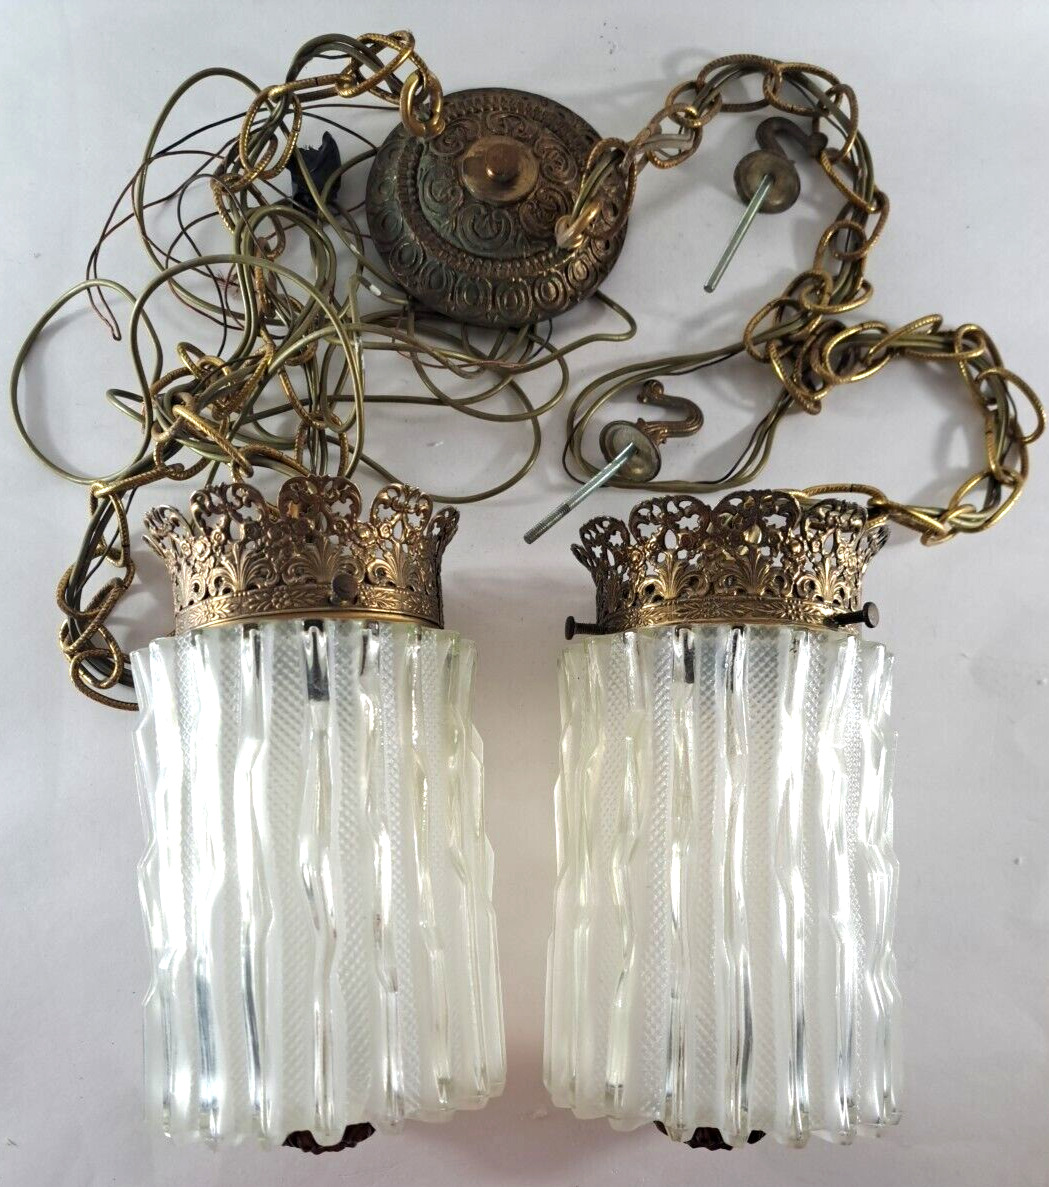 Vintage Ceiling Swag Lights Fixture W Chains Ornate Gold Tone Mid Century